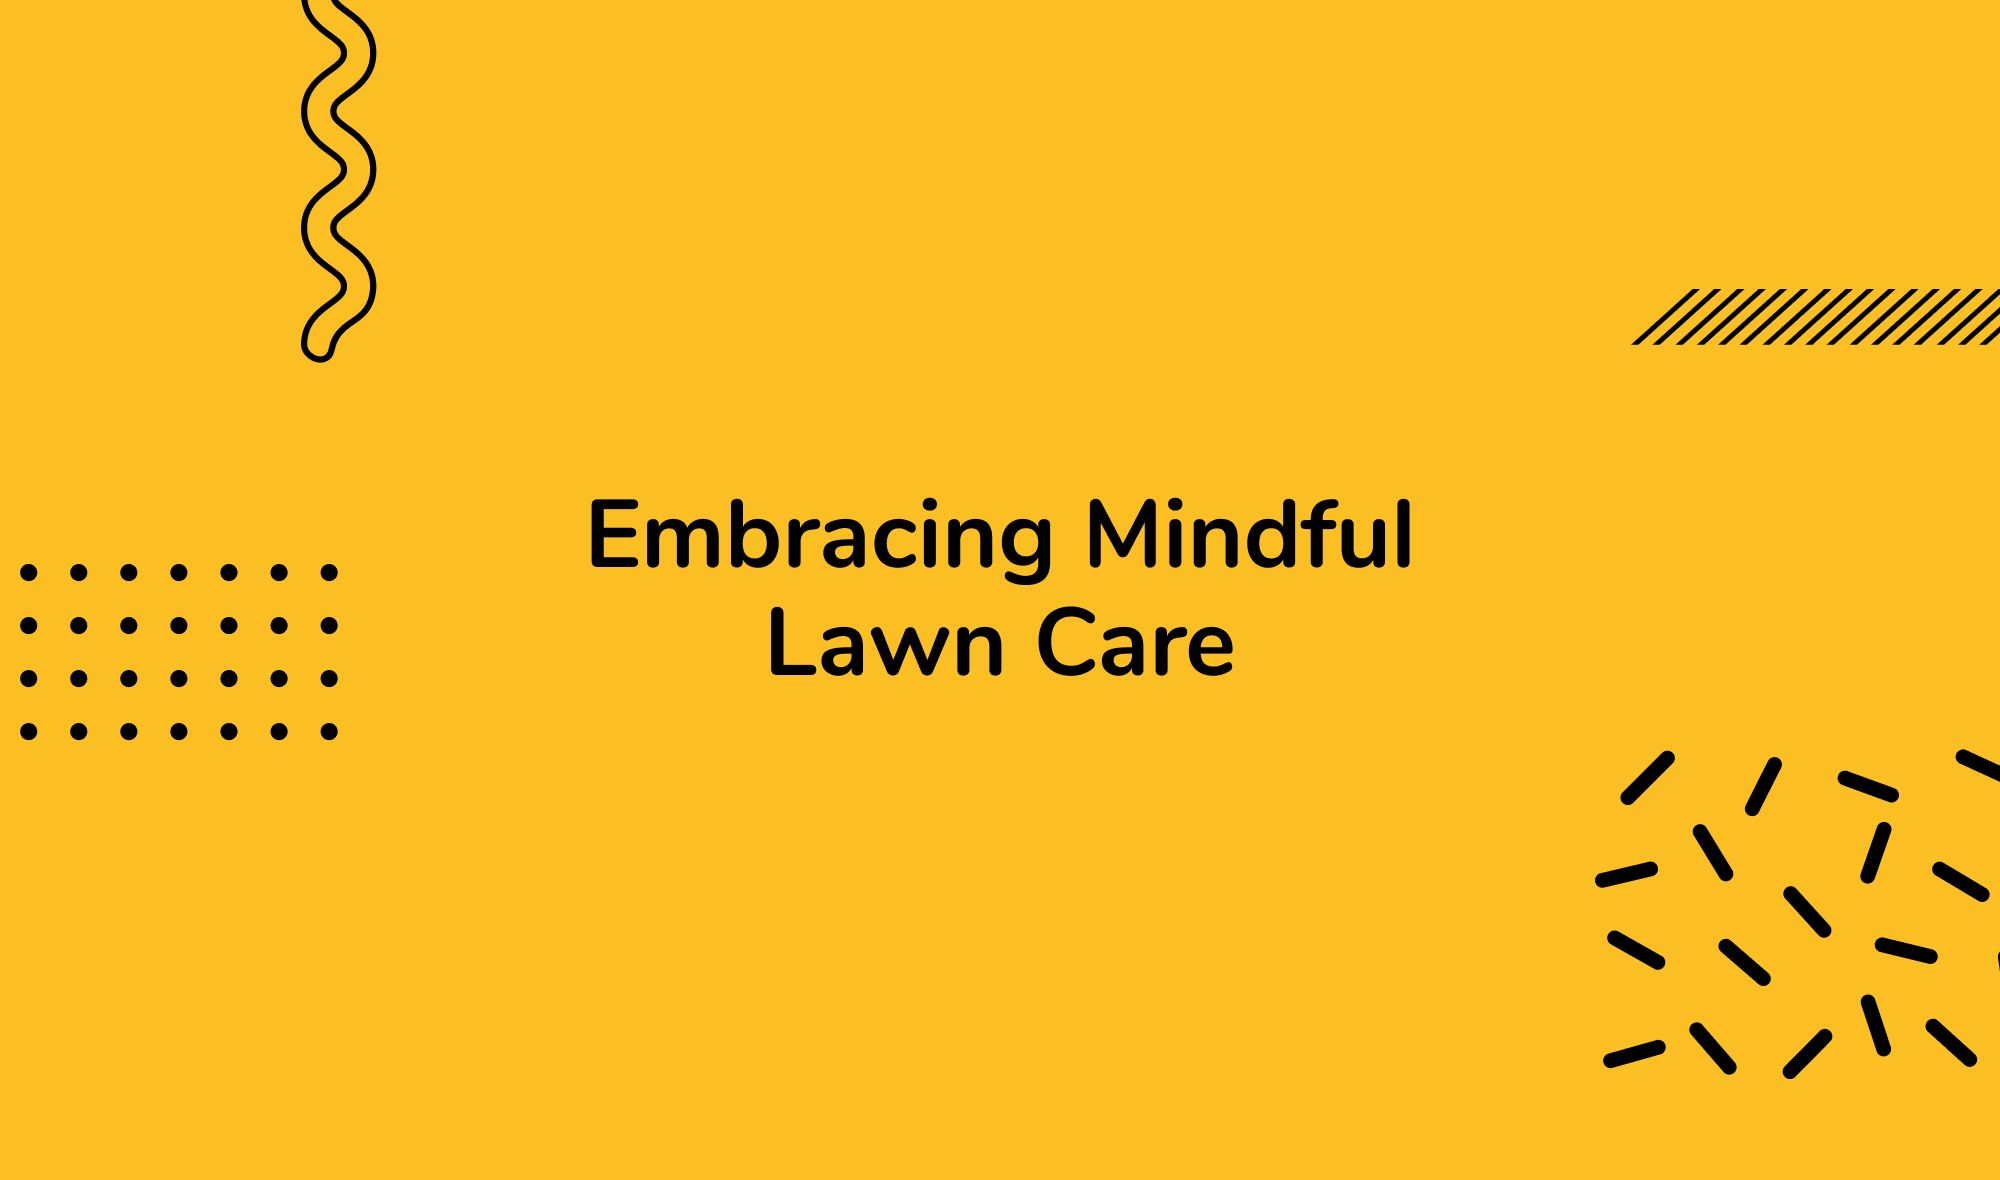 Conclusion: Embracing Mindful Lawn Care